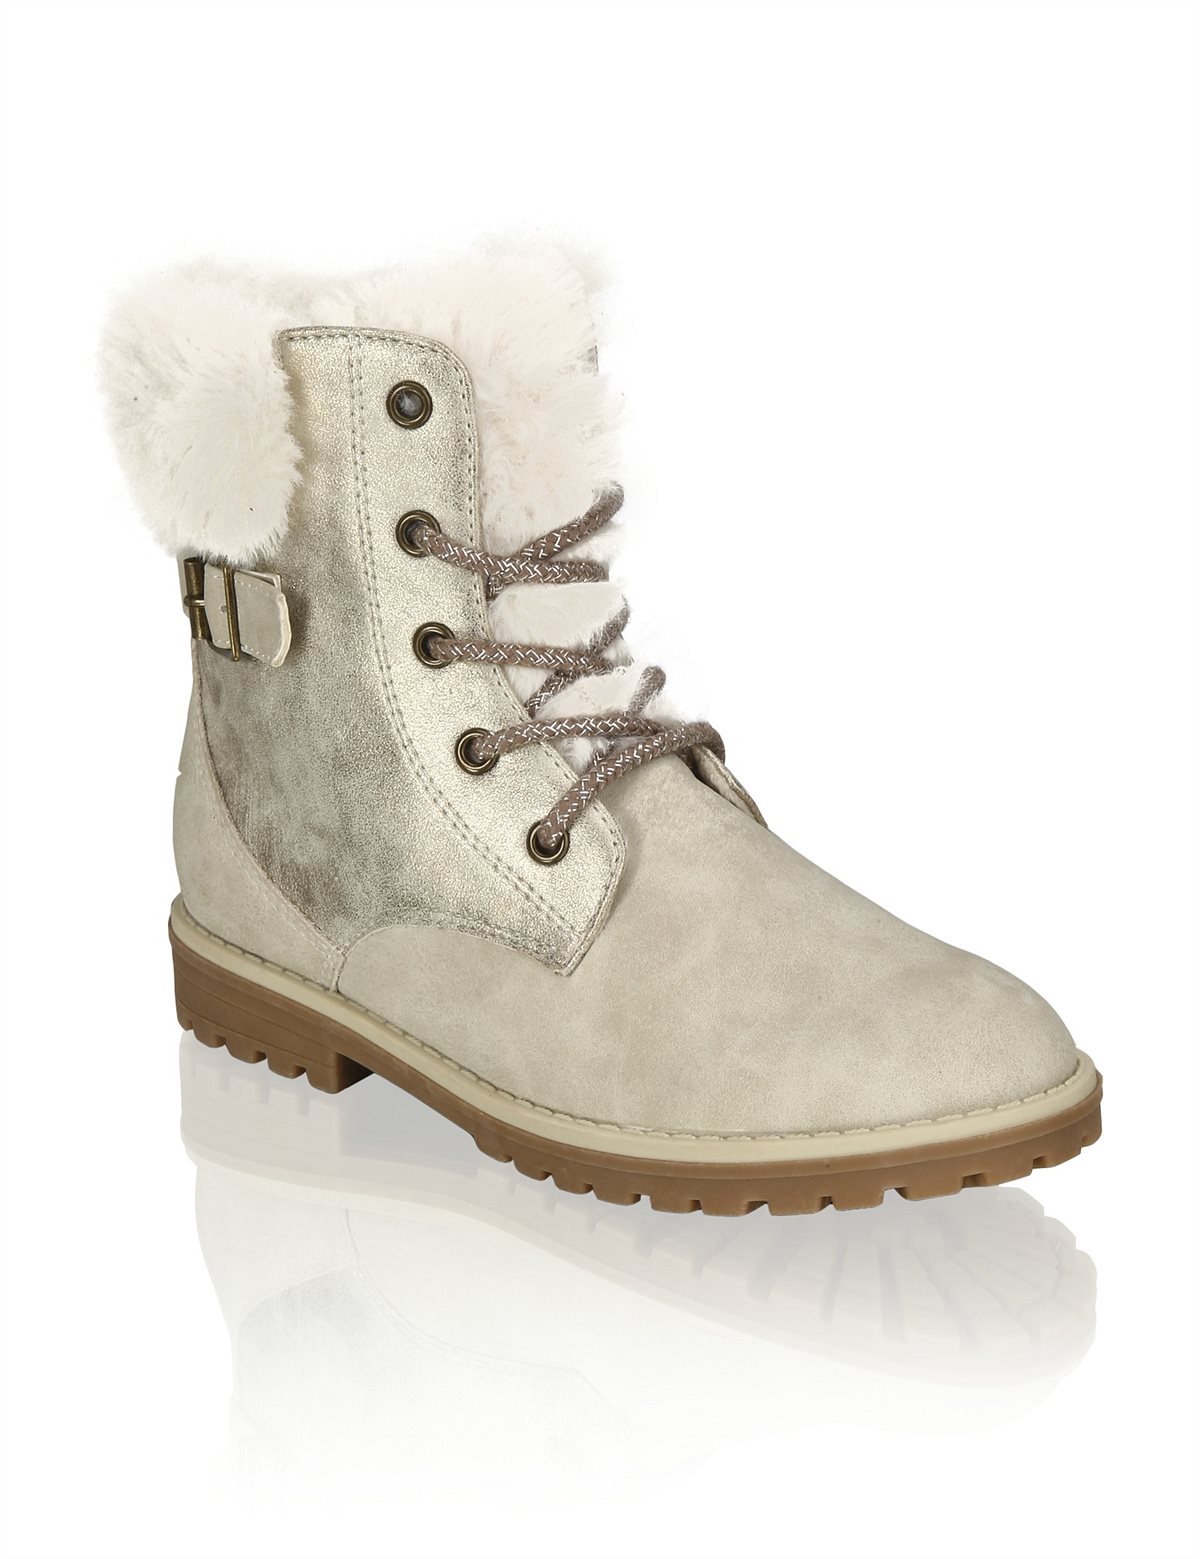 HUMANIC 69 Funky Girls Boots mit Warmfutter EUR 39,95 3623504725